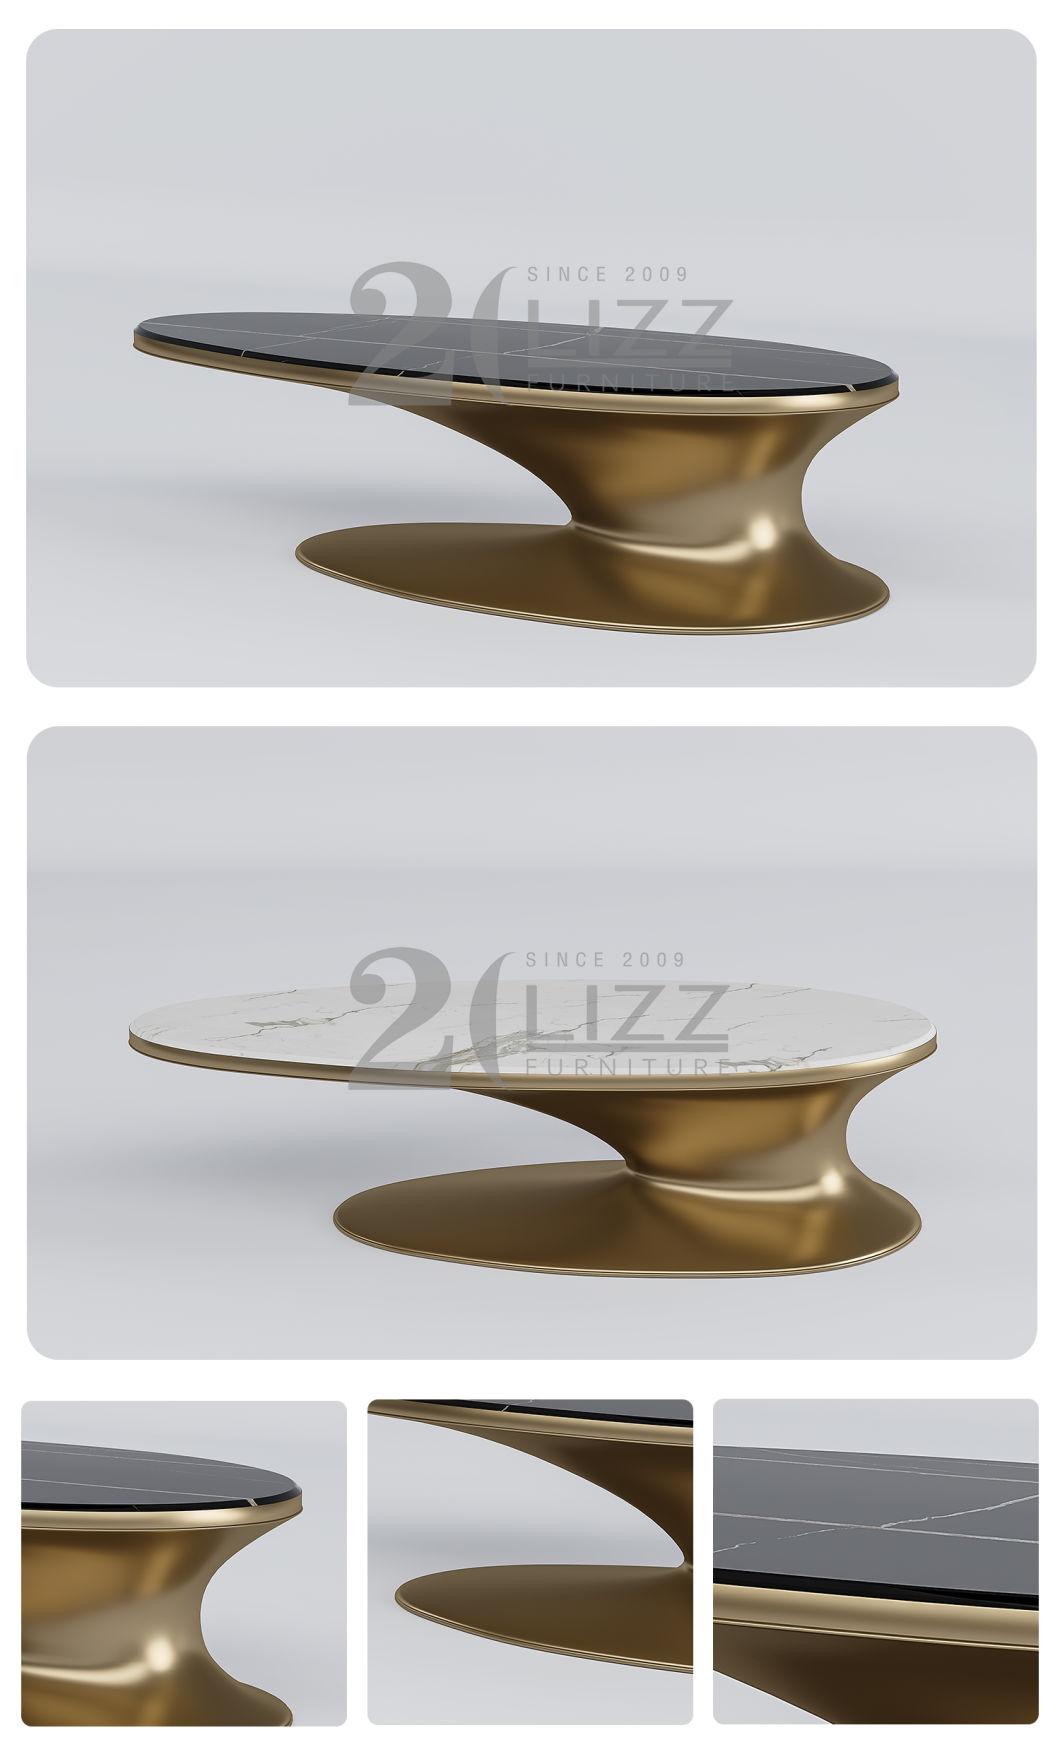 Special Design Contemporary Royal Stainless Steel Marble Top Coffee Table for Home Living Room